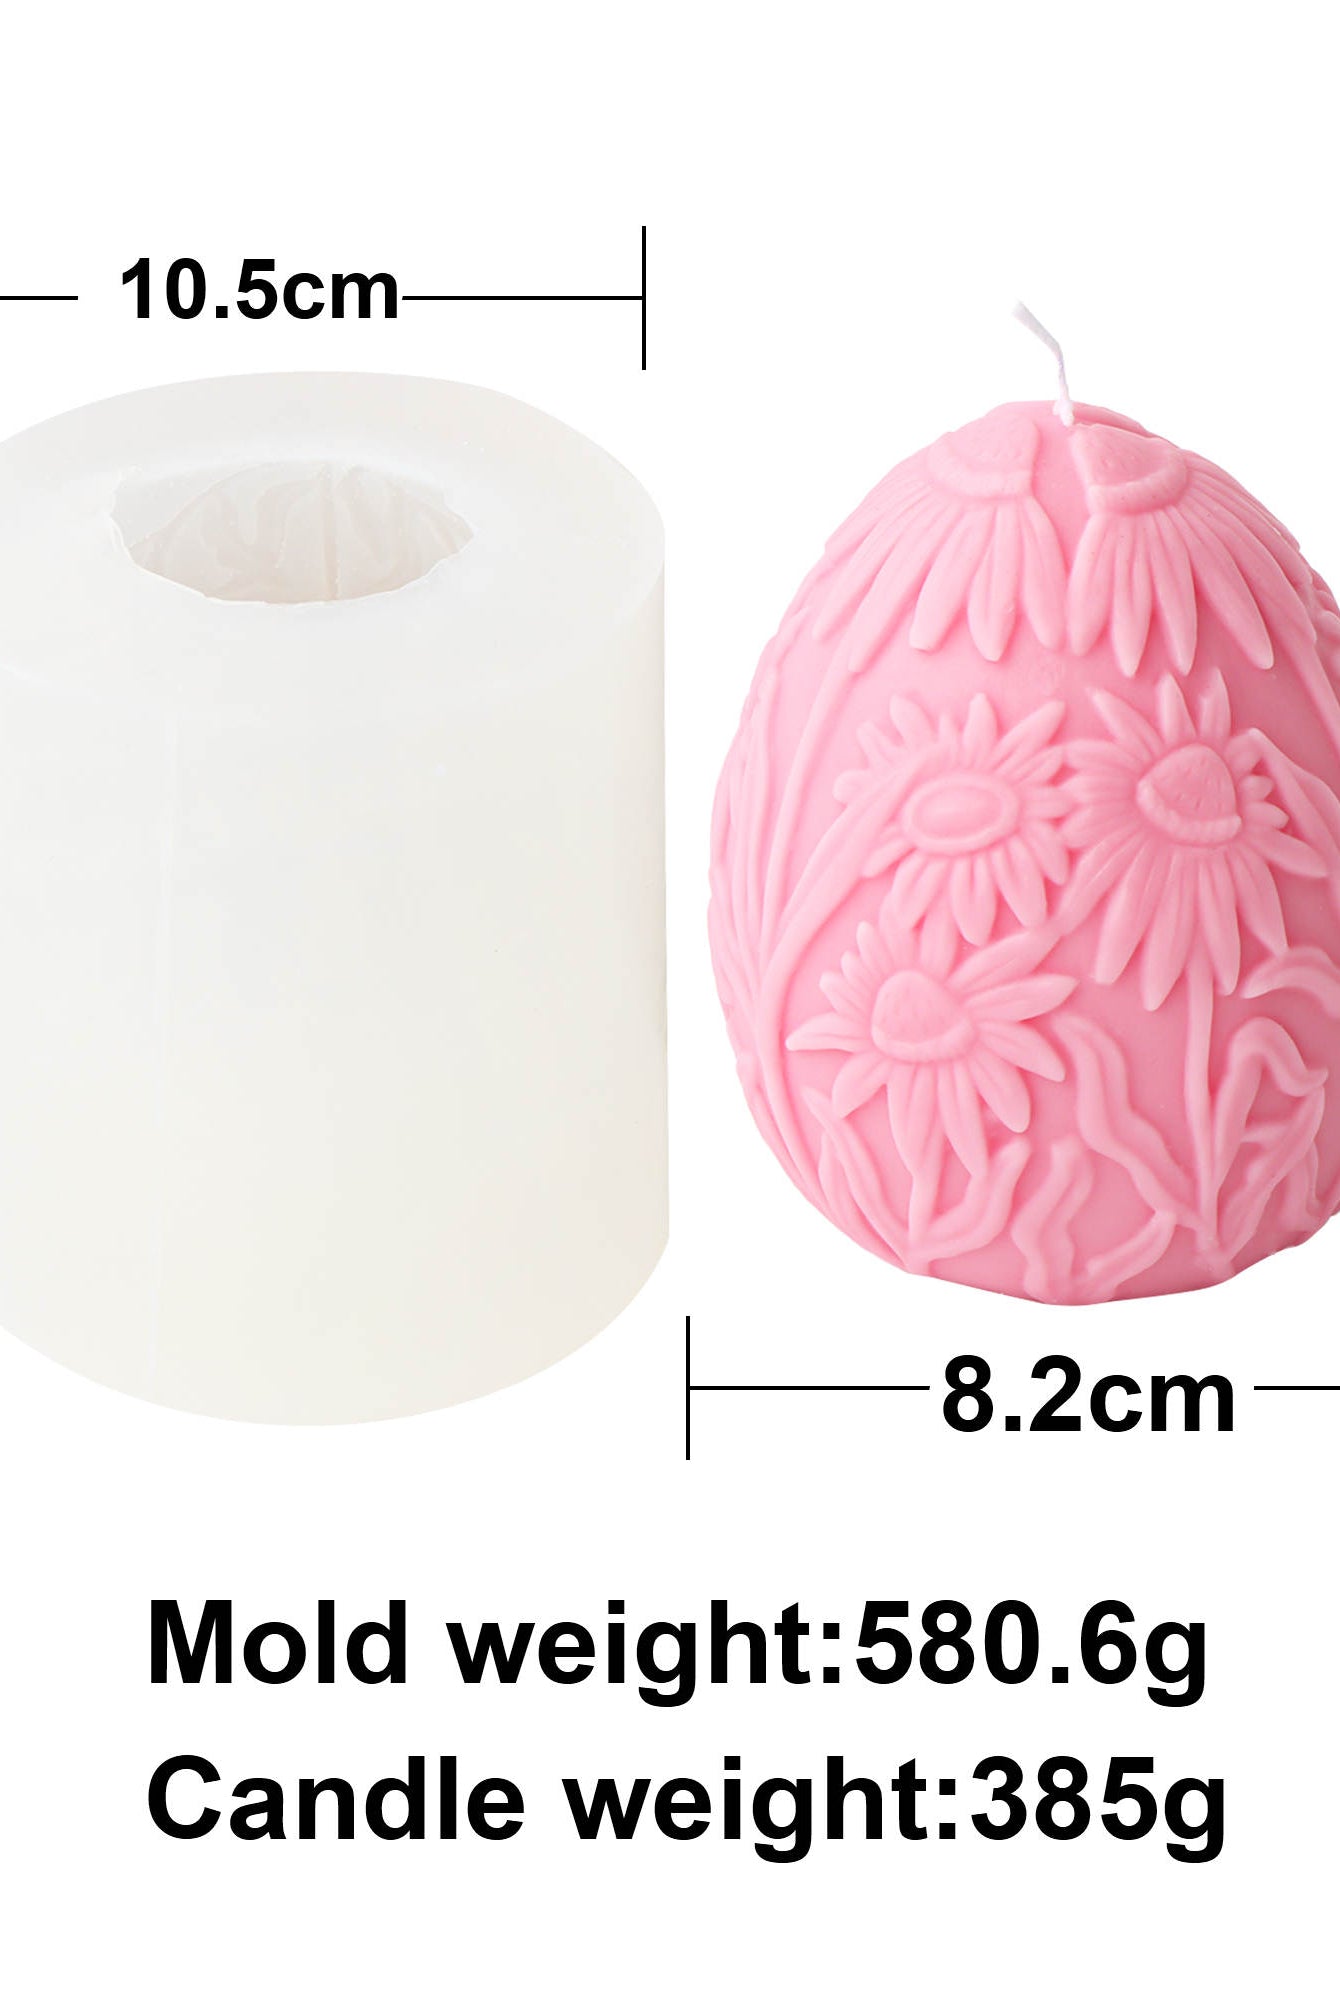 Floral Egg Candle Moulds 9 - Silicone Mould, Mold for DIY Candles. Created using candle making kit with cotton candle wicks and candle colour chips. Using soy wax for pillar candles. Sold by Myka Candles Moulds Australia